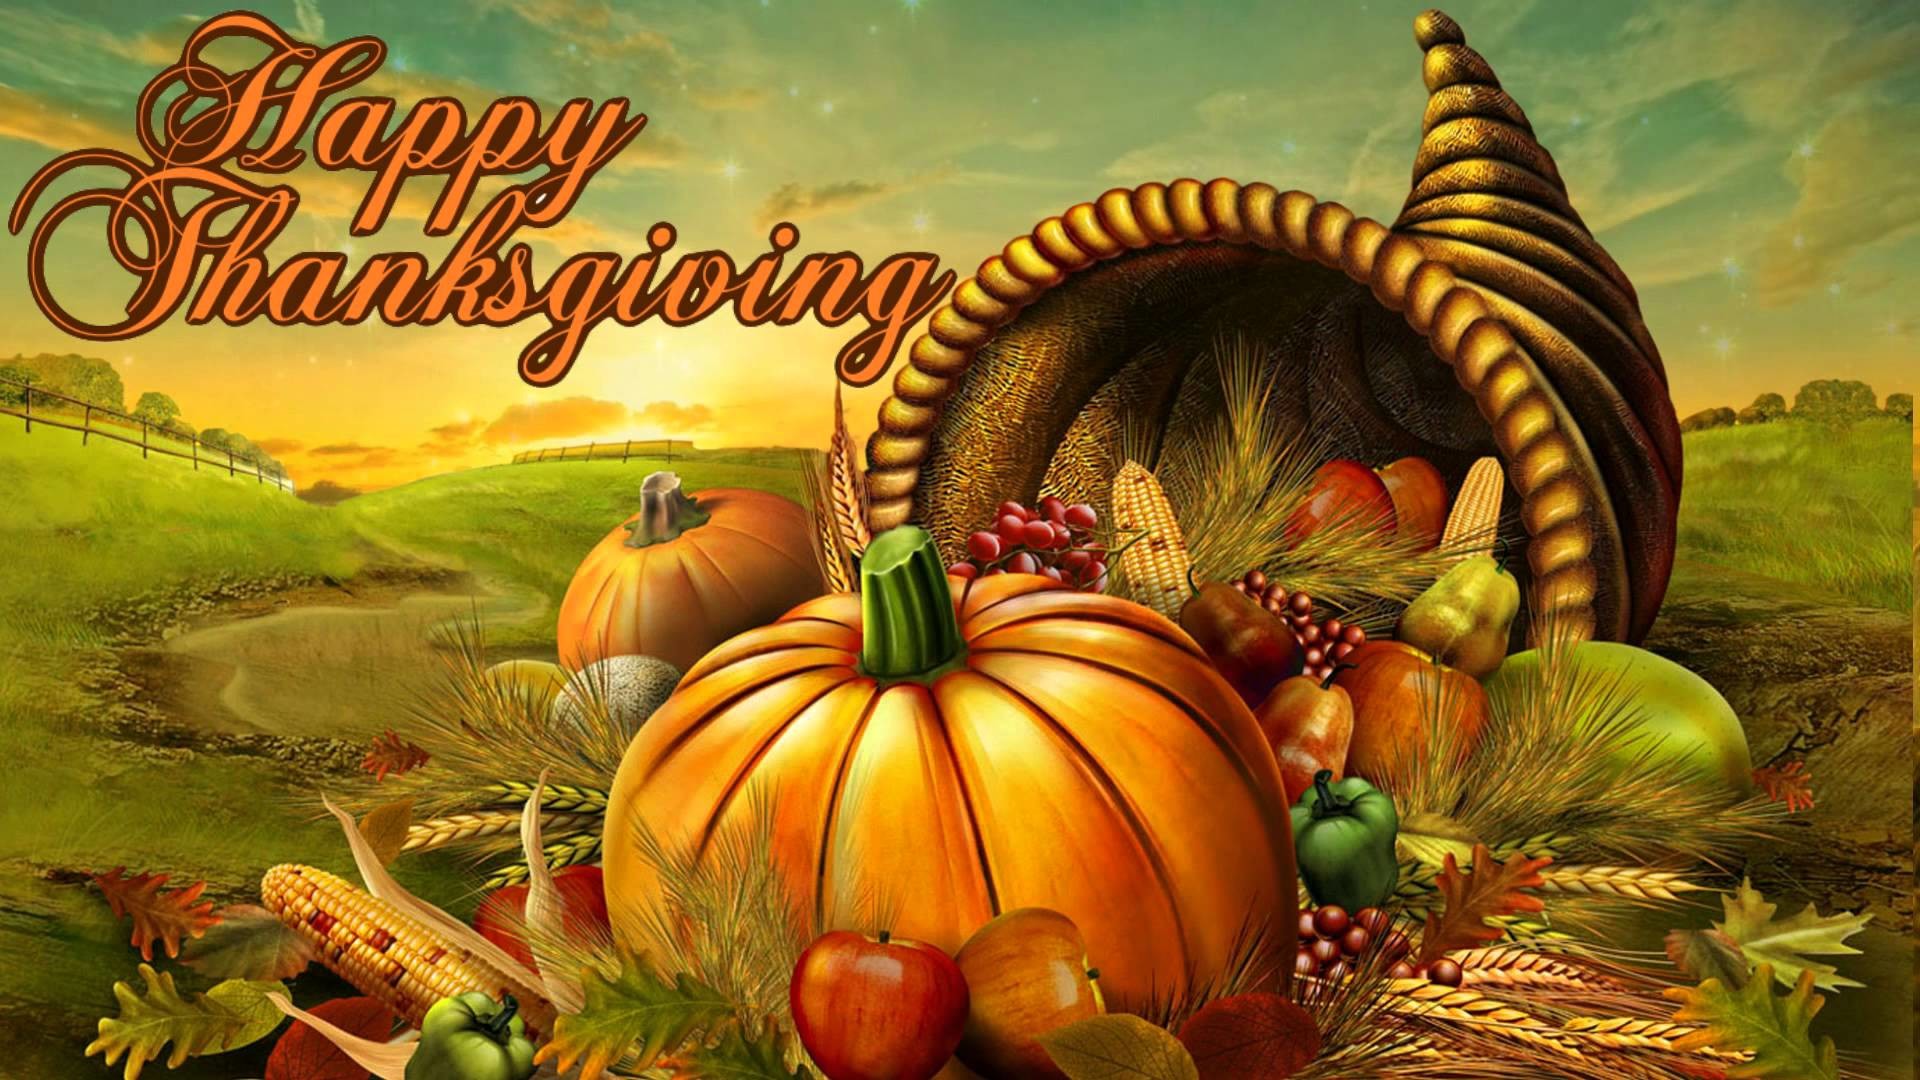 1920X1080 Hd Thanksgiving Wallpapers